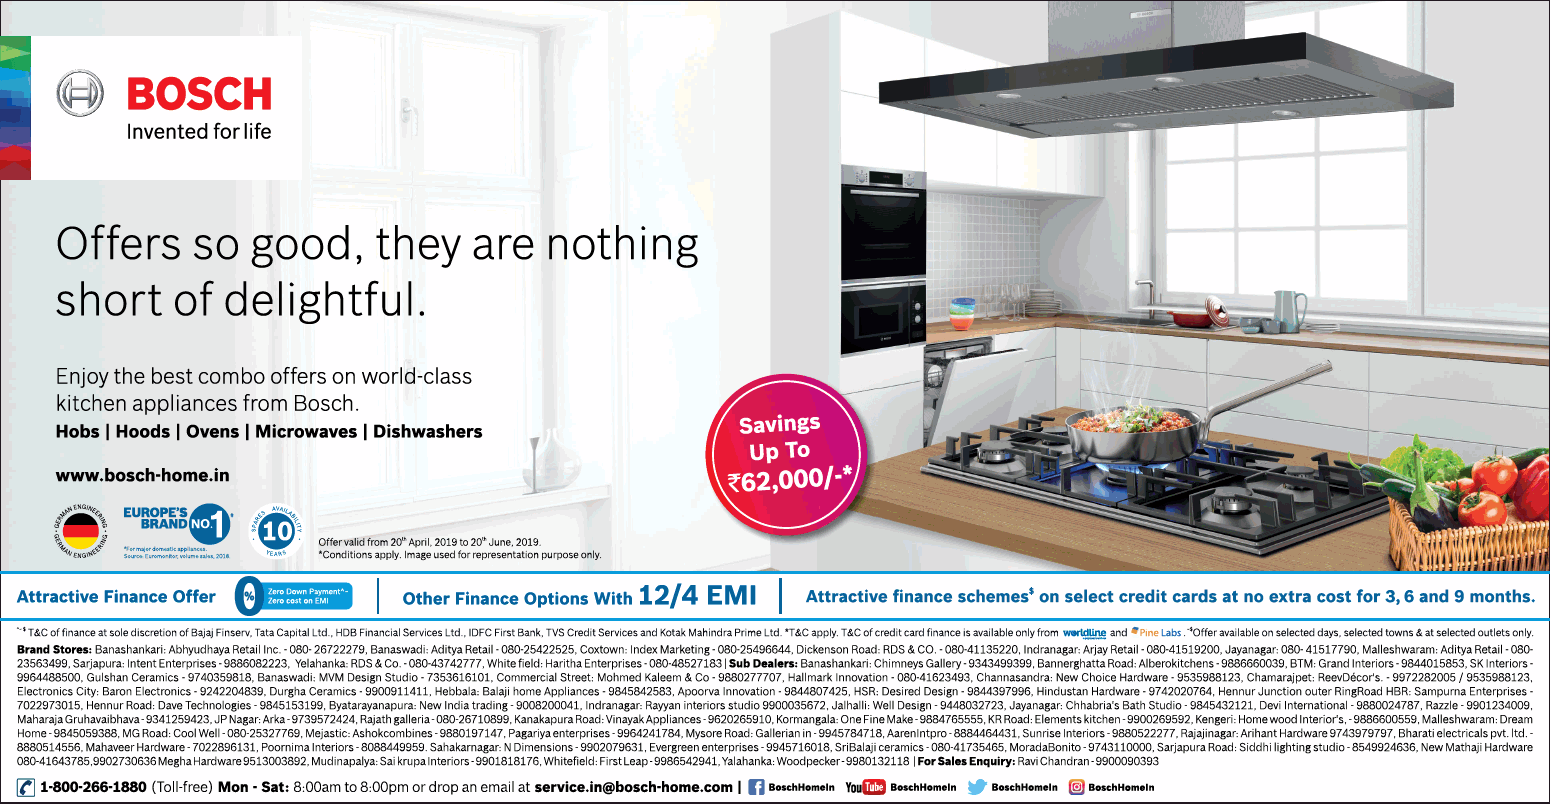 bosch-home-appliances-offer-so-good-they-are-nothing-short-delightful